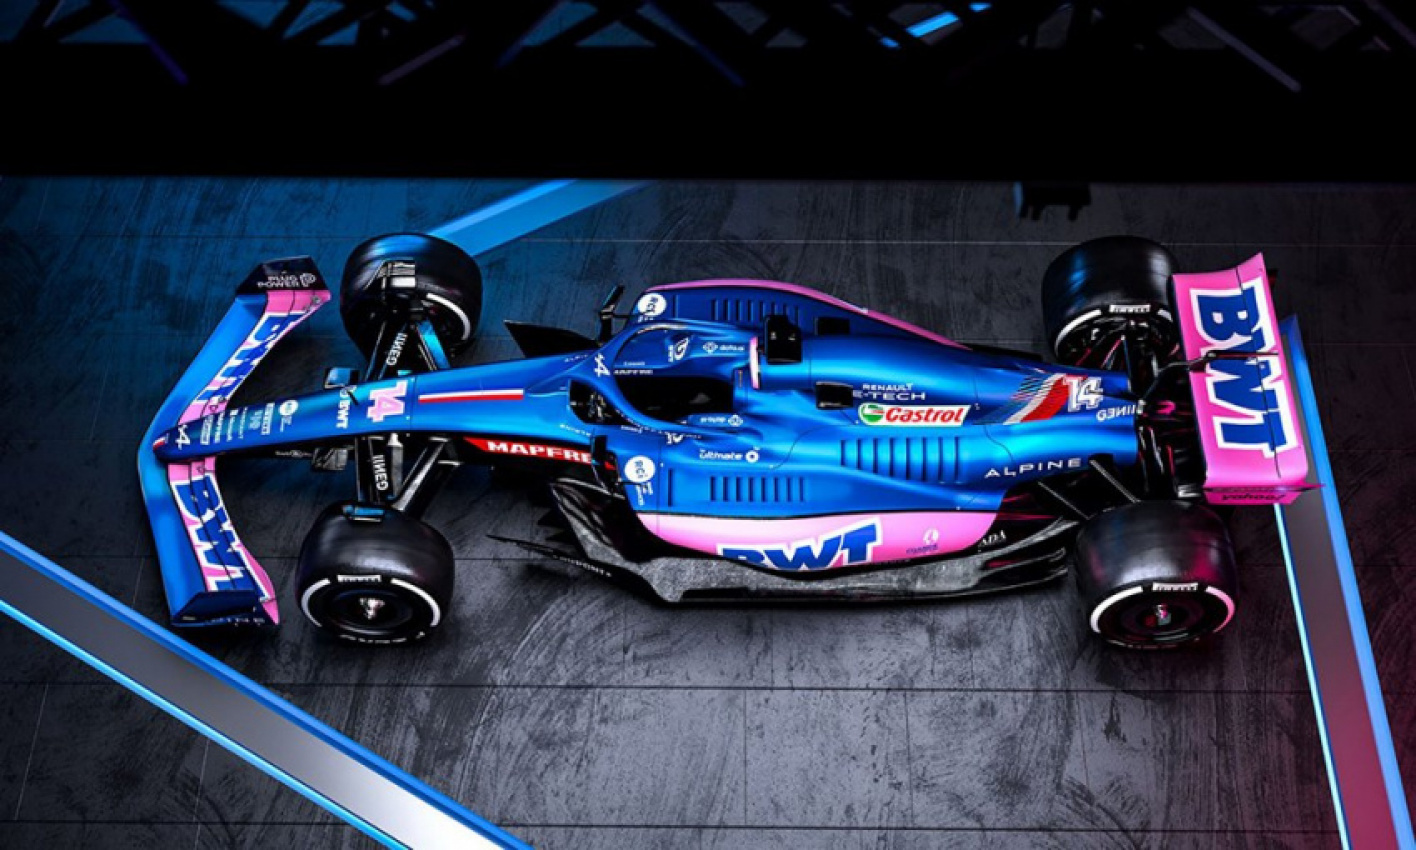 acer, autos, cars, reviews, check out alpine f1’s blue-and-pink racer for the 2022 season